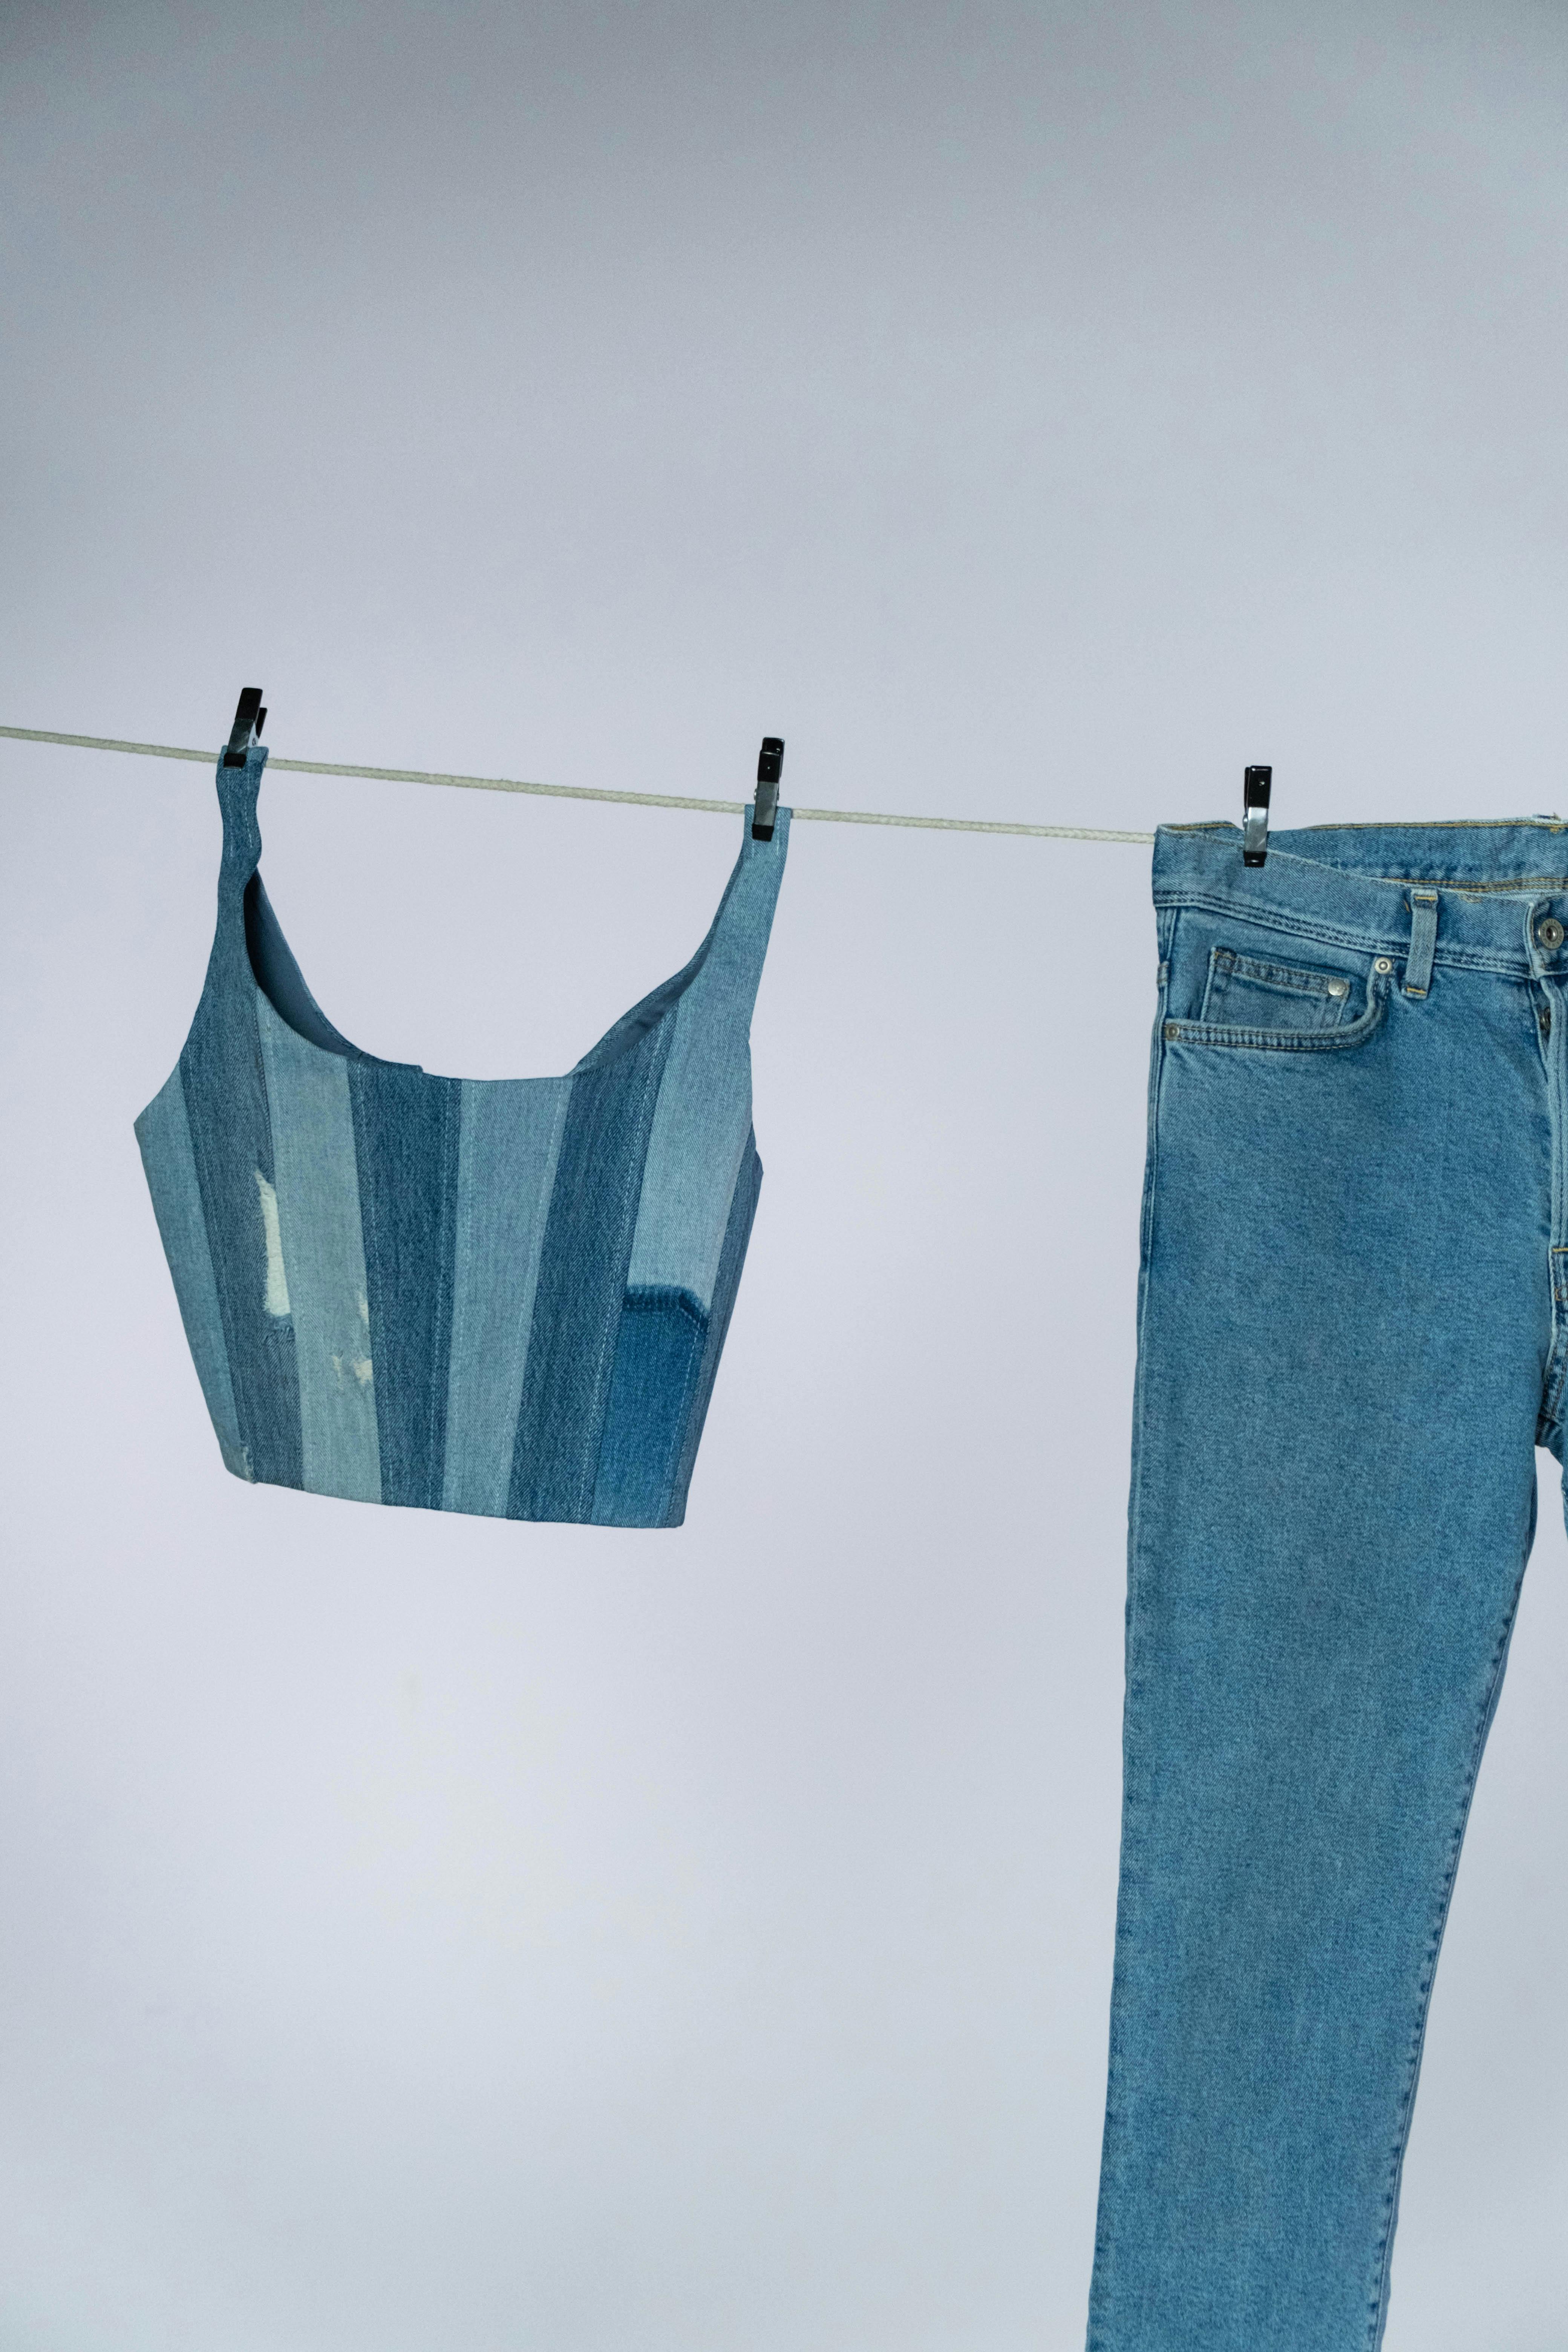 Stylish jeans hung on wooden chair · Free Stock Photo